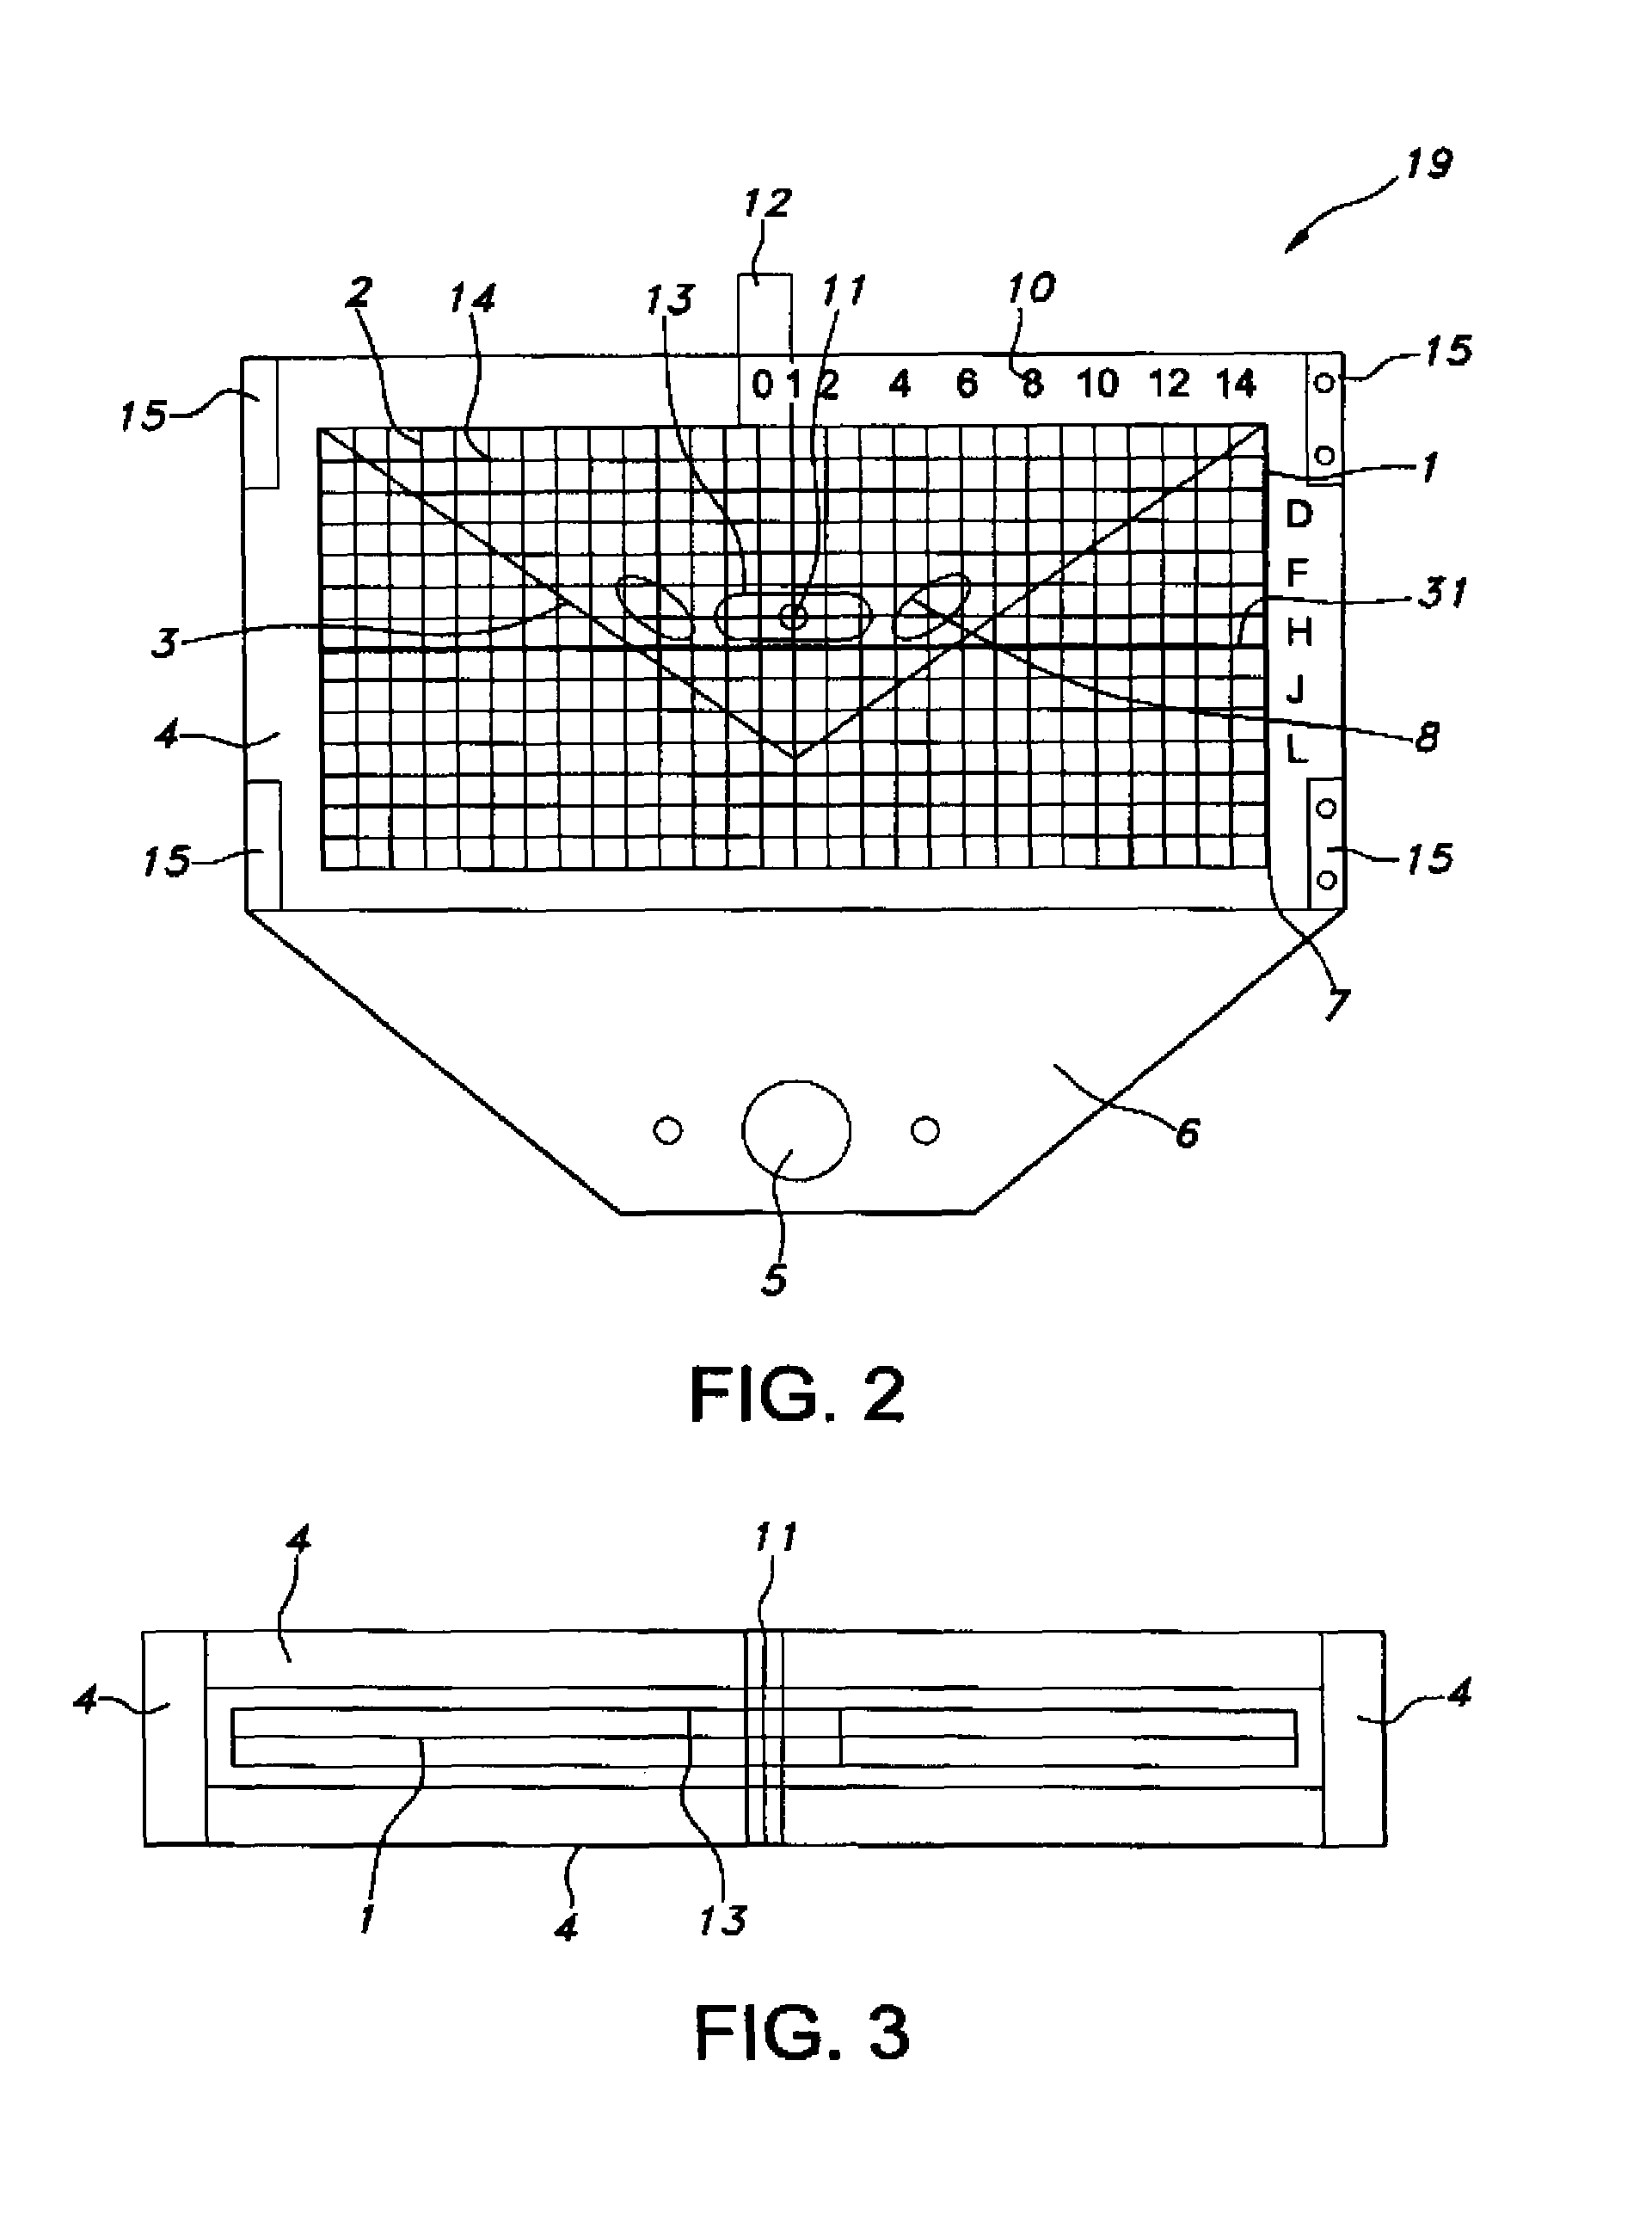 Alignment plate apparatus and method of use